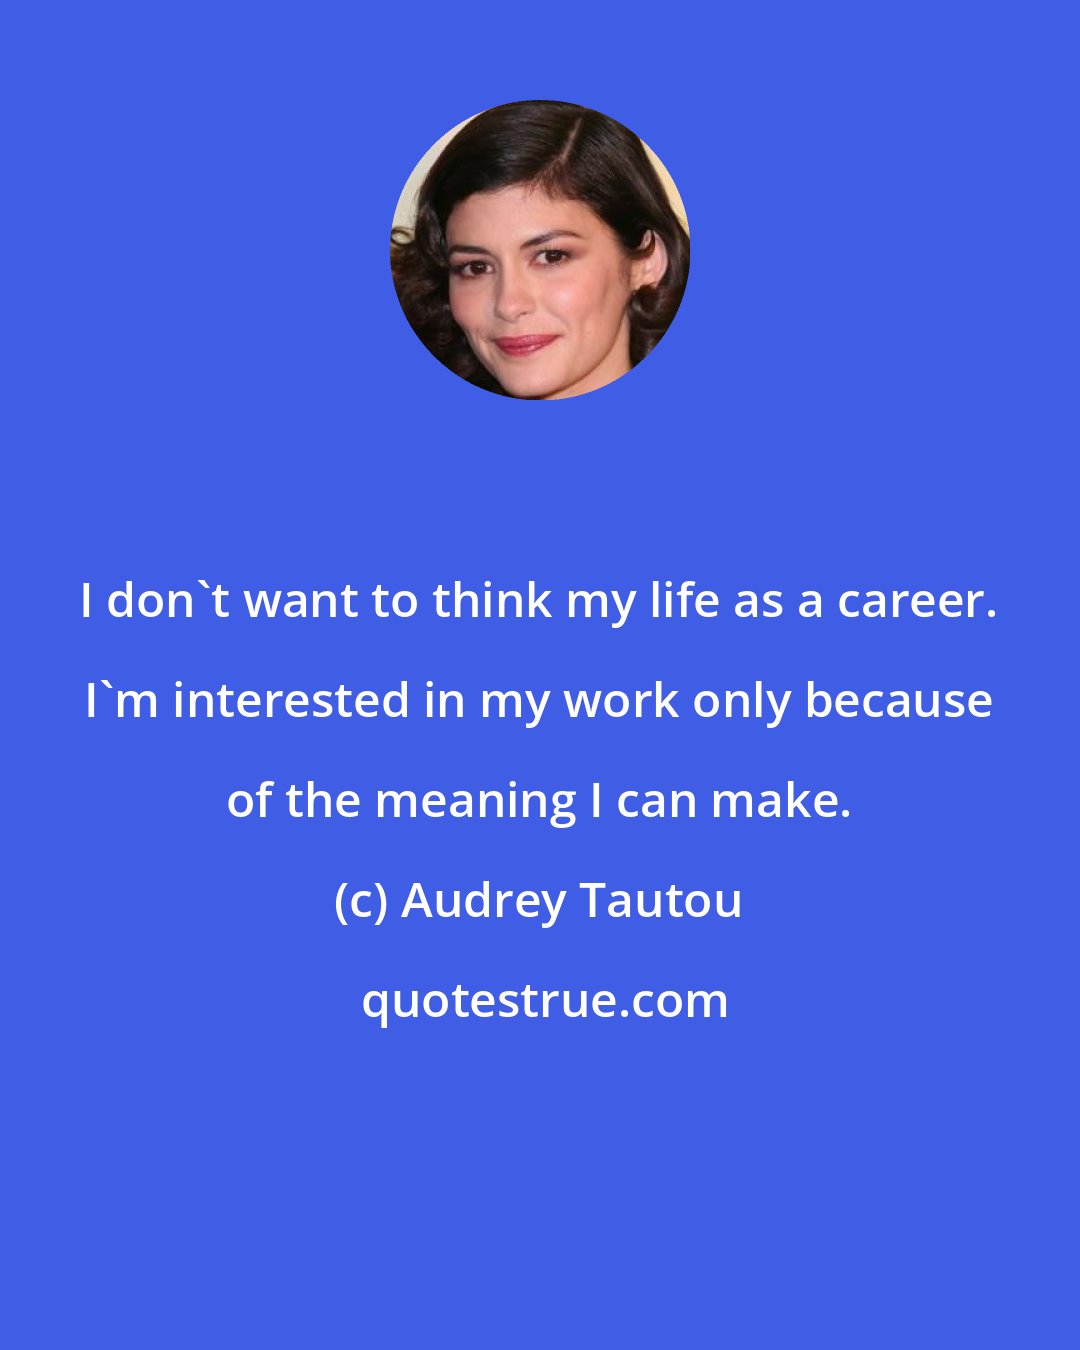 Audrey Tautou: I don't want to think my life as a career. I'm interested in my work only because of the meaning I can make.